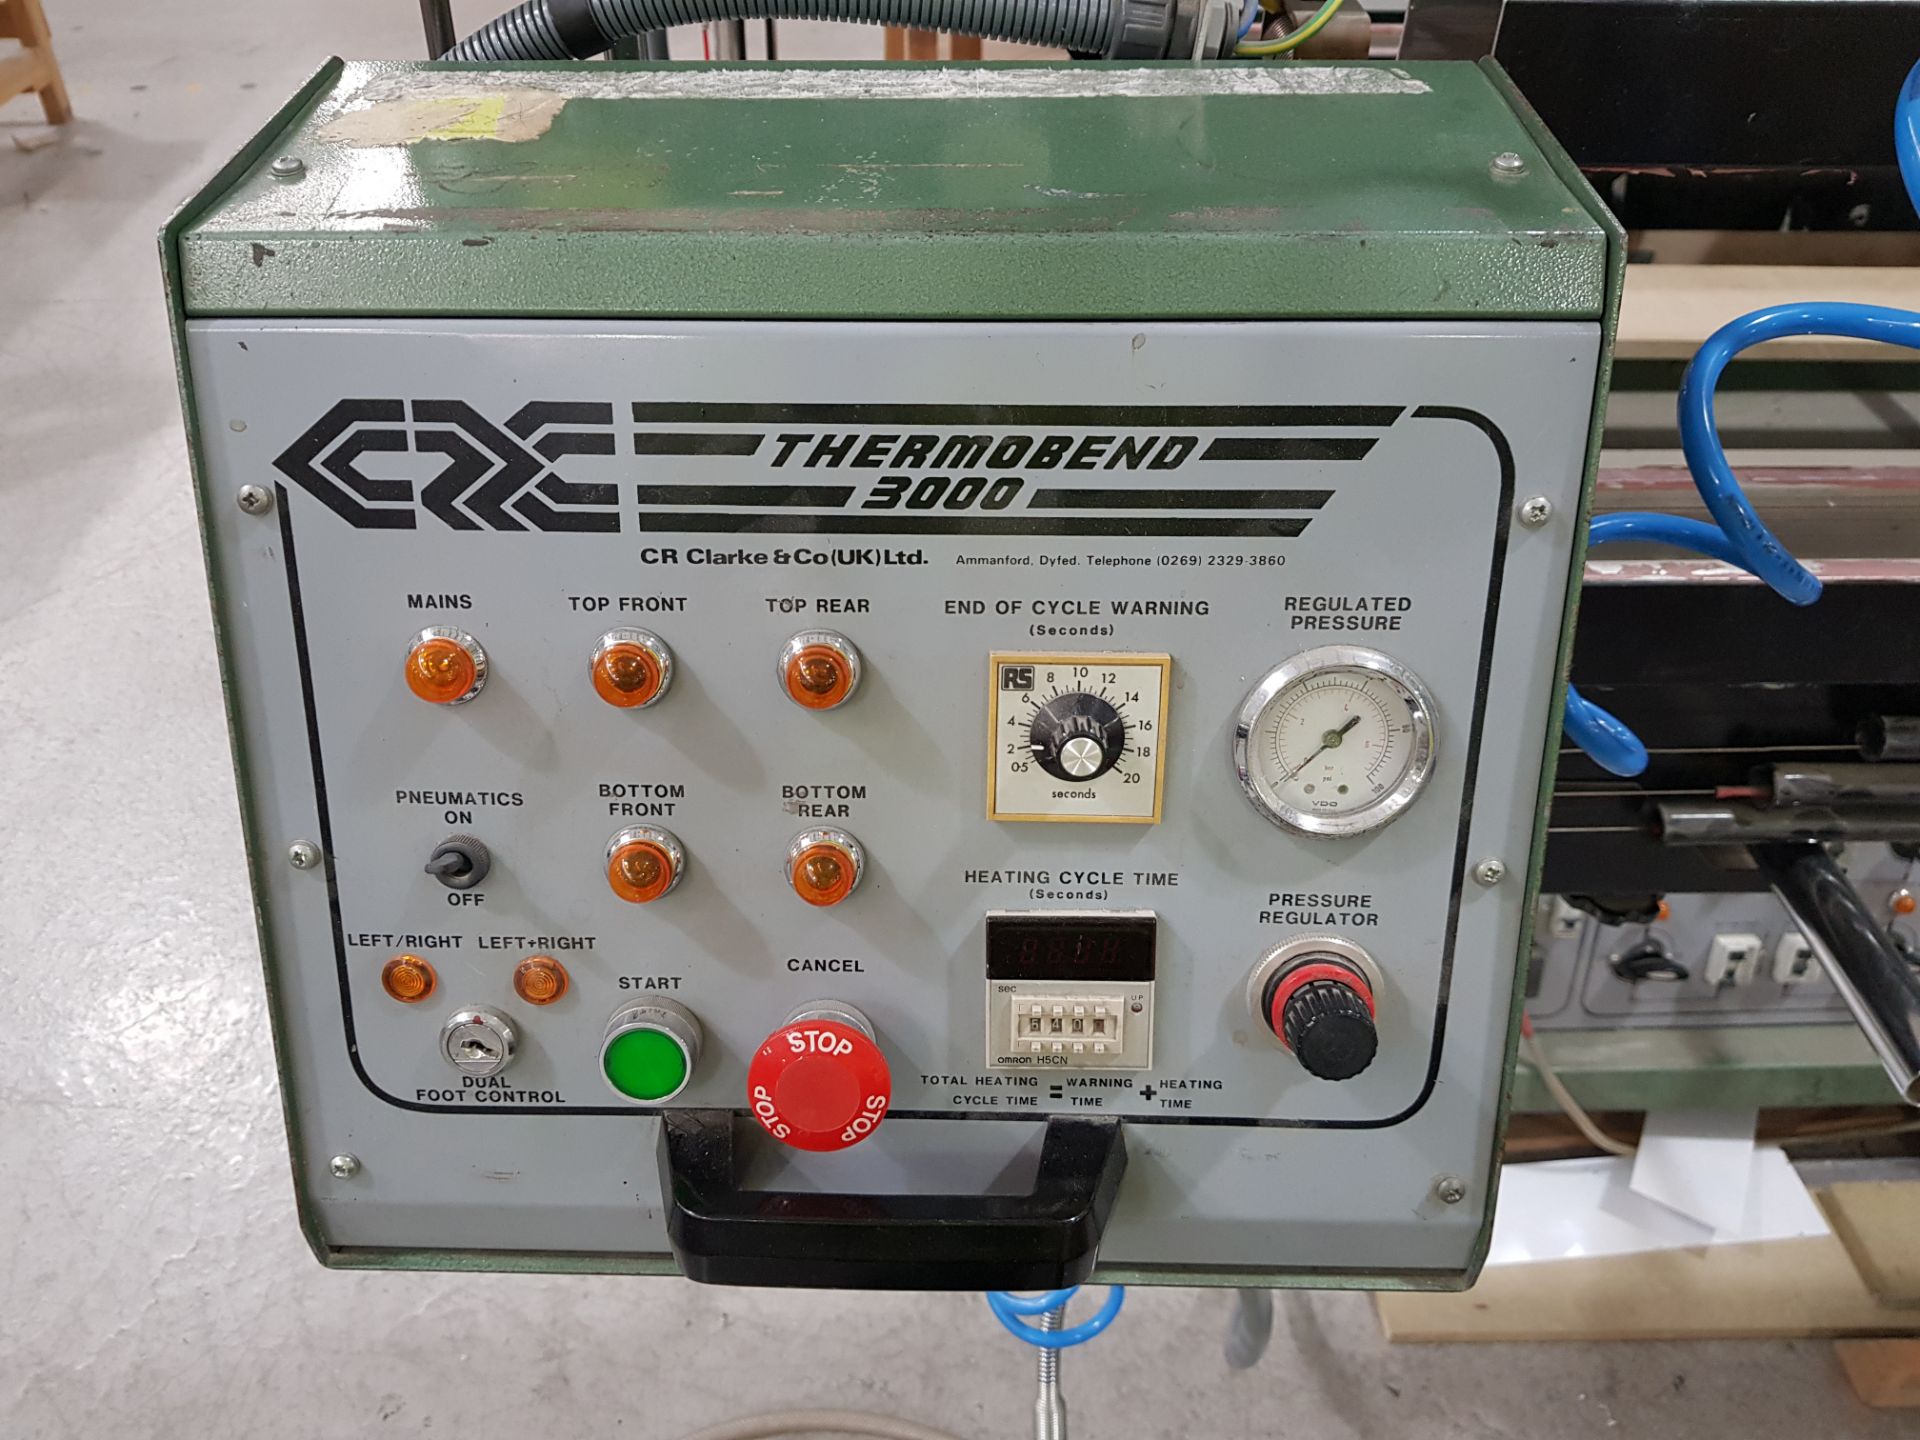 1 X THERMOBEND 3000 WIRE STRIP HEATER - CR CLARKE - SN 300007 - 240 V - MODEL - 3000 D (ASSETS - Image 5 of 7